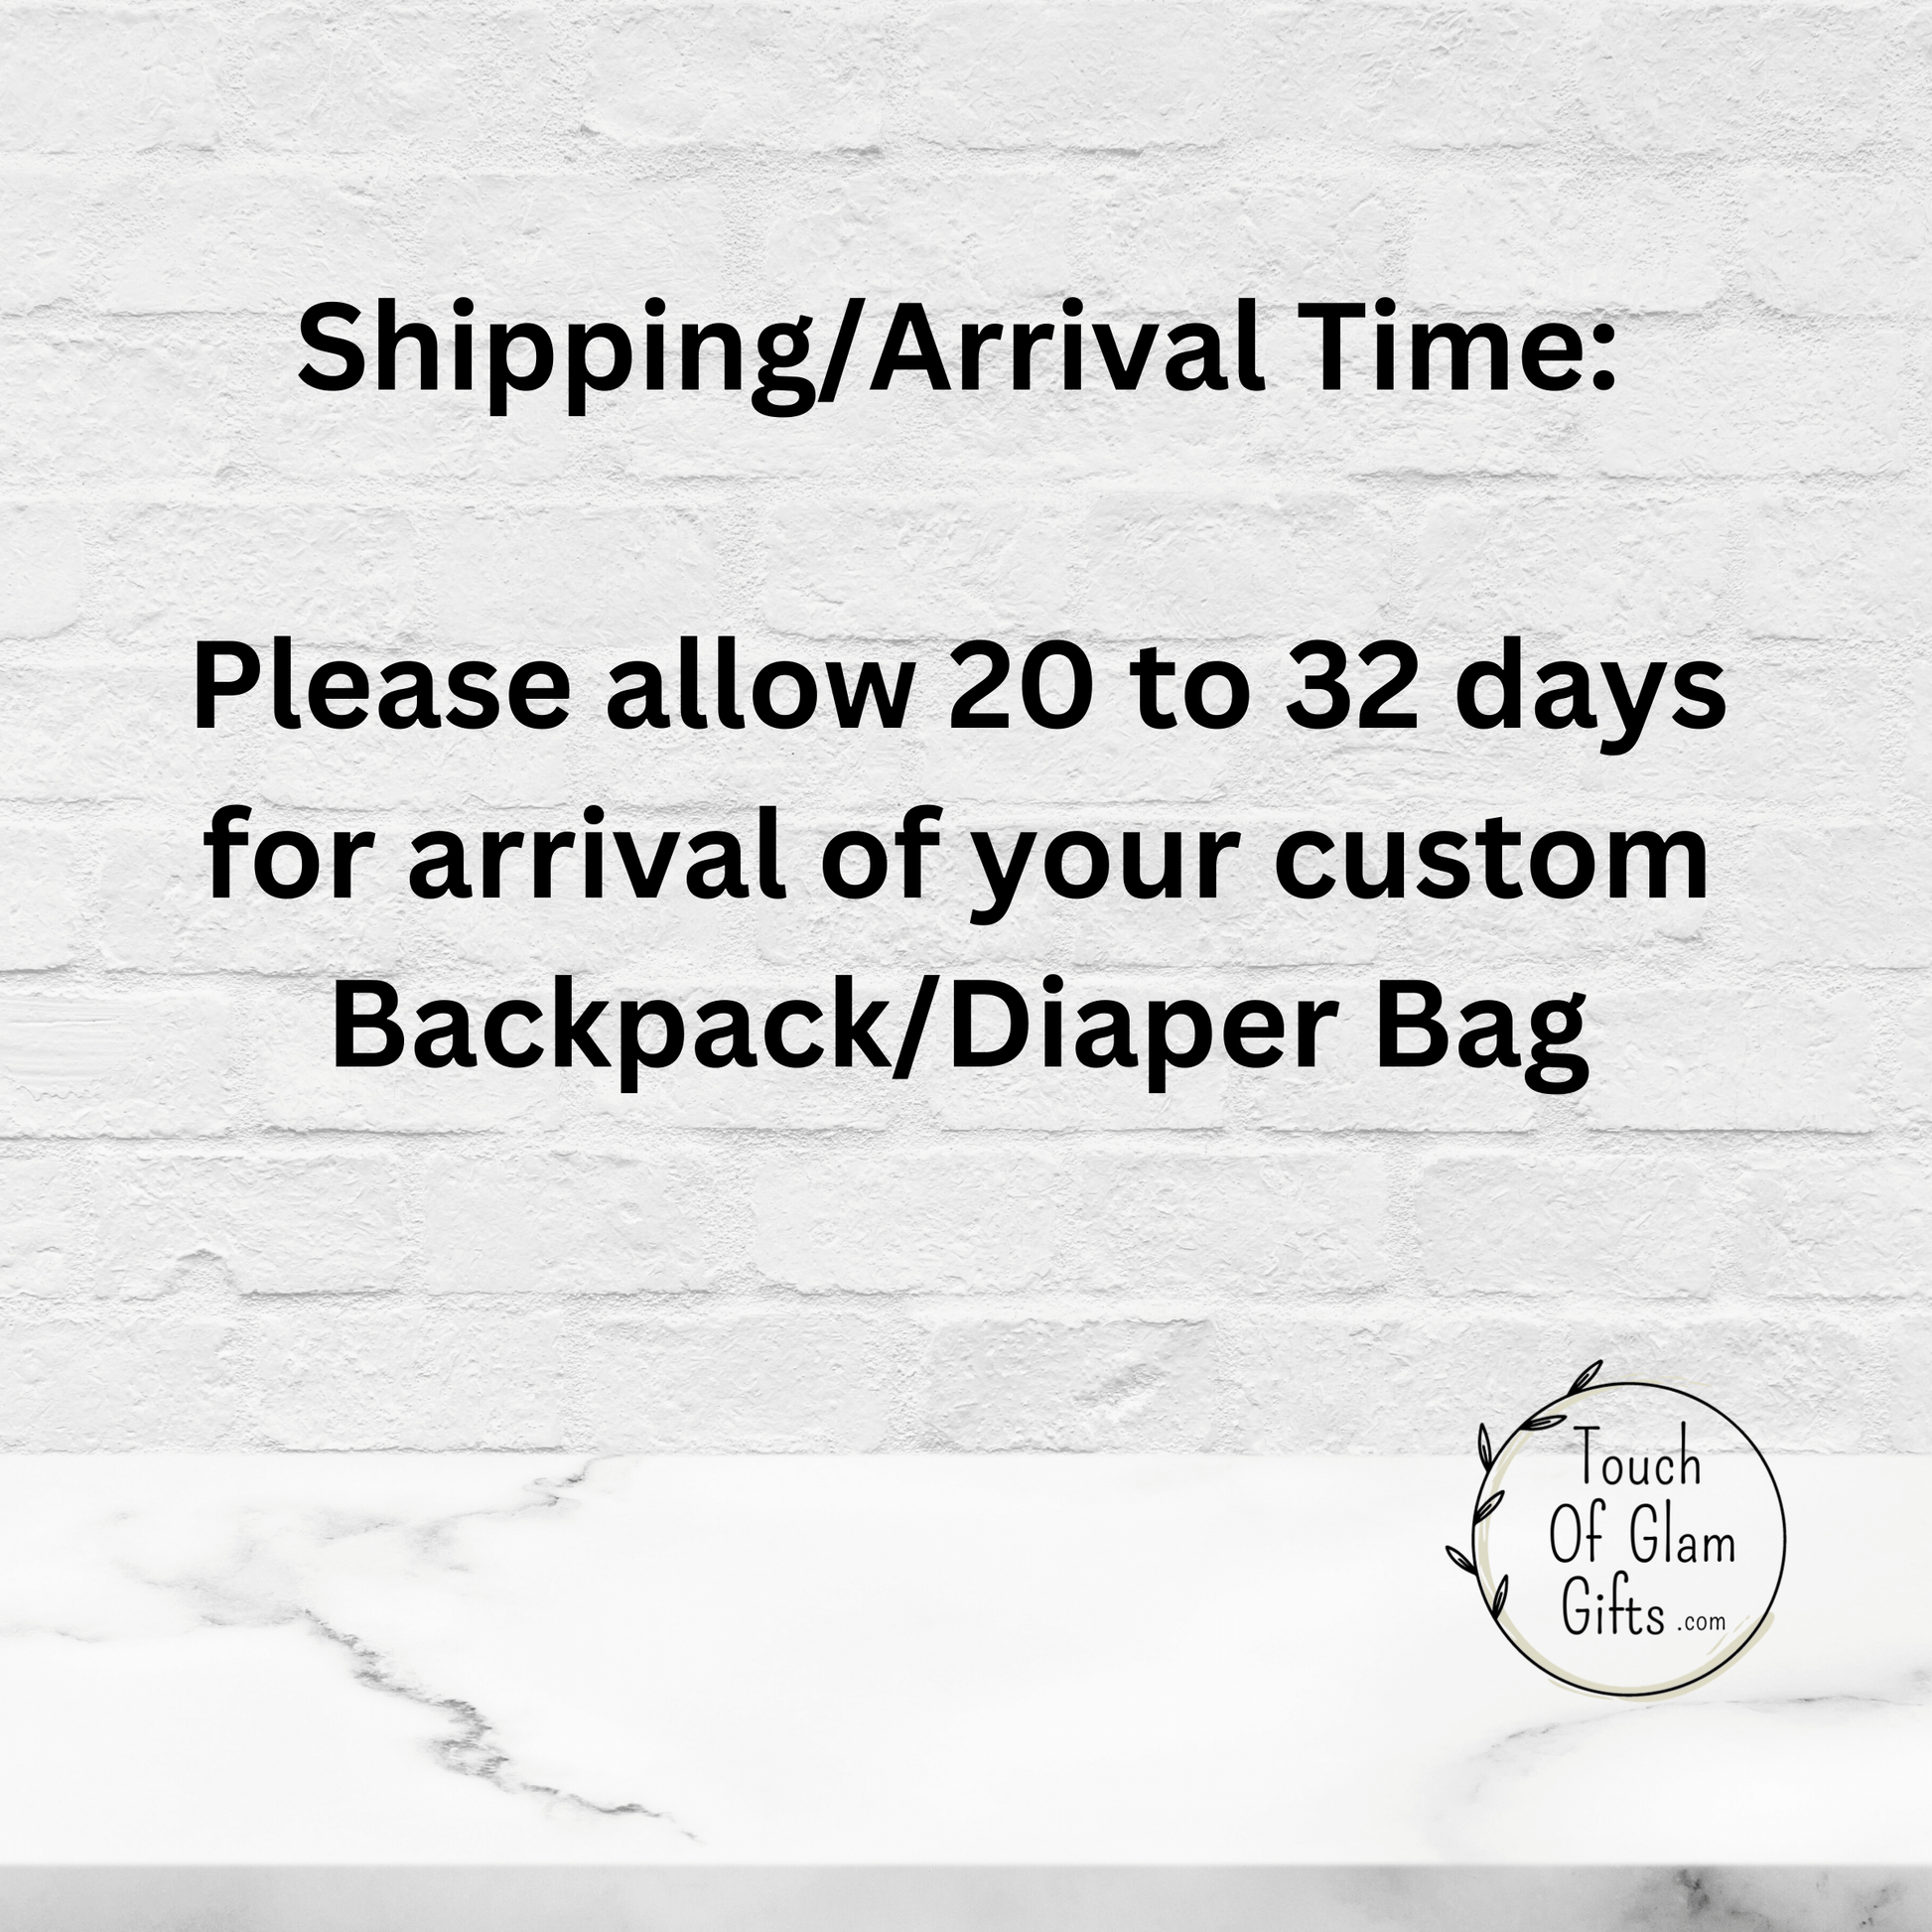 SHipping arrival time is twenty to thirty two days for the custom diaper backpack.